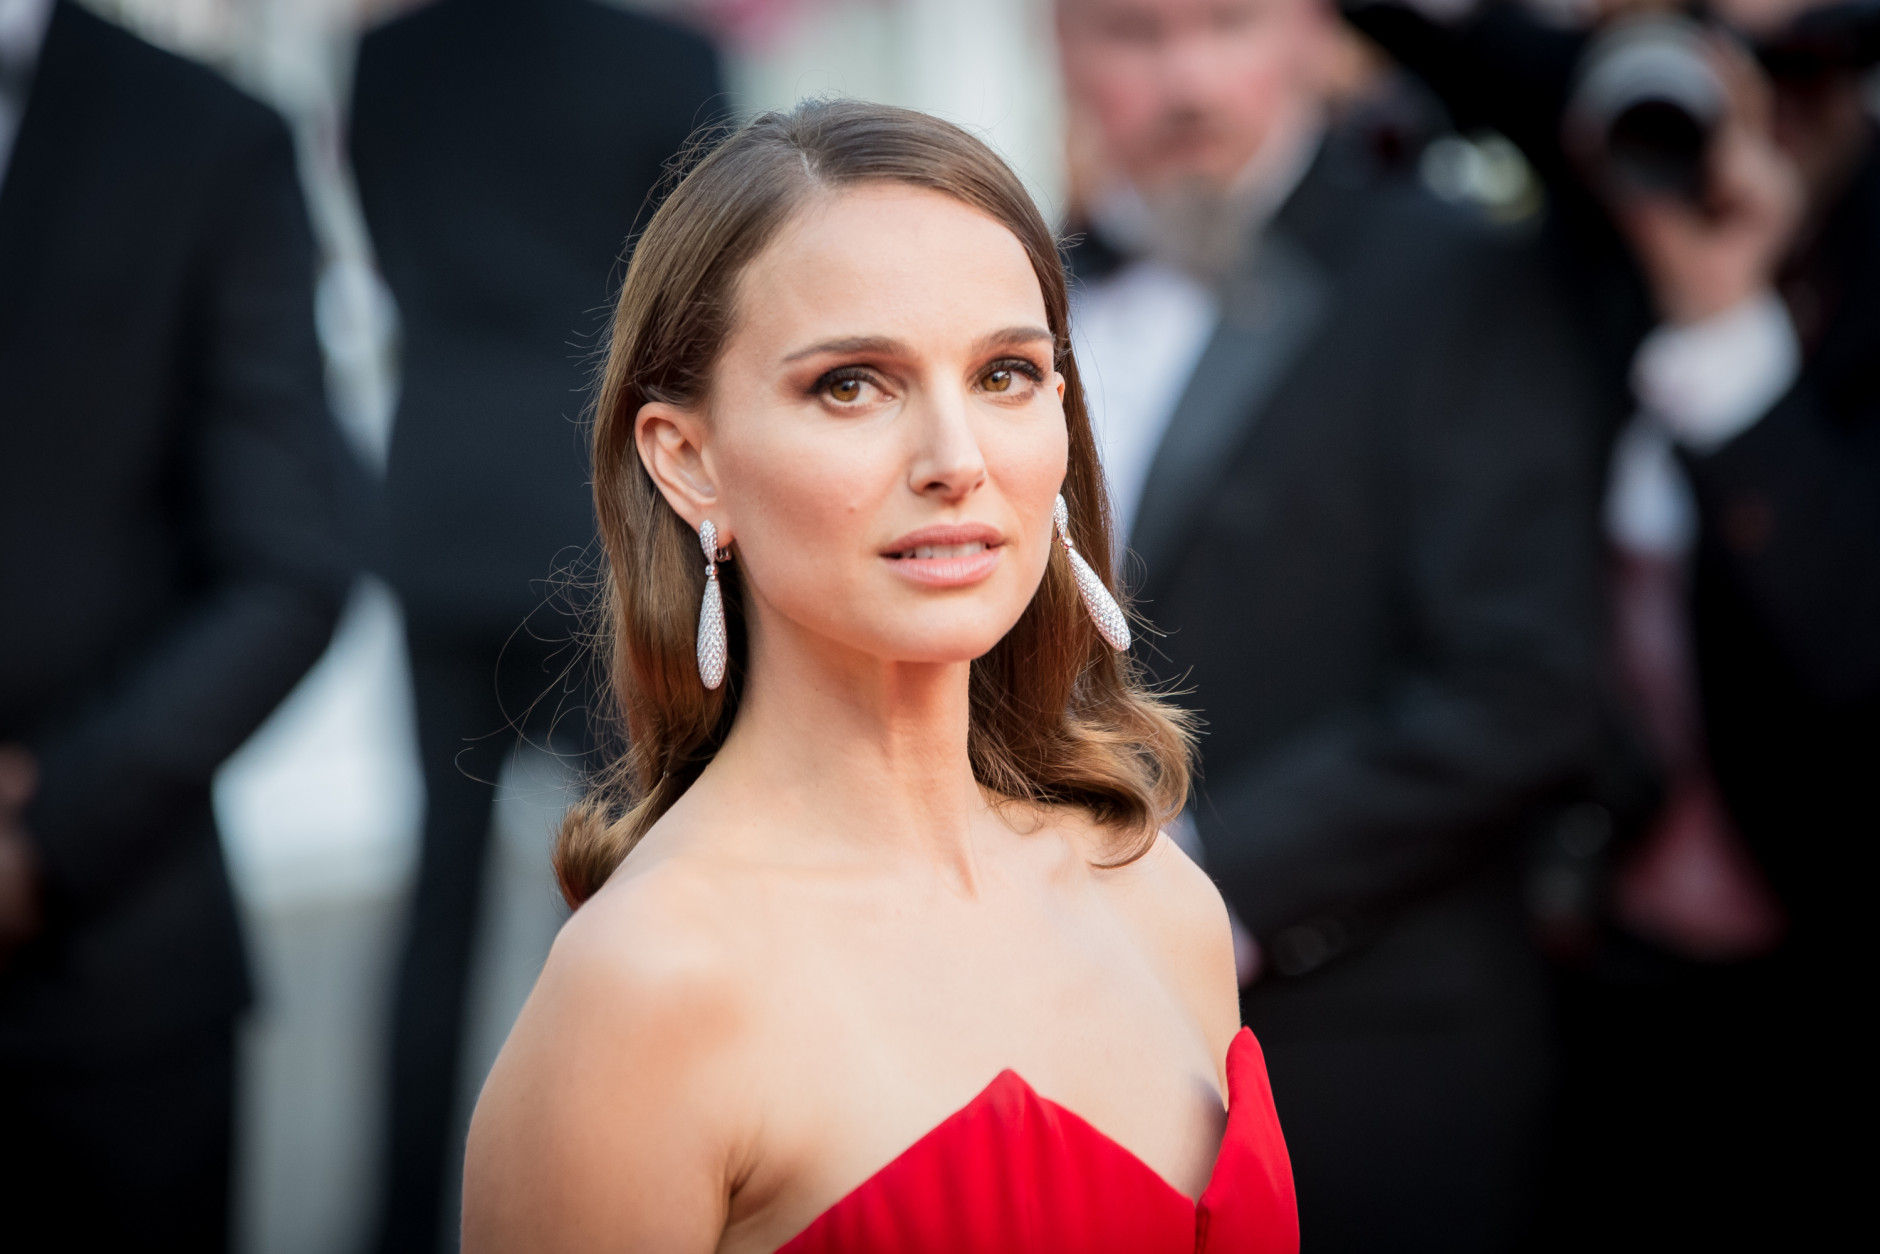 Natalie Portman arrives for the opening ceremony and for the screening of the film La Tete Haute (Standing Tall) at the 68th international film festival, Cannes, southern France, Wednesday, May 13, 2015. (Photo by Vianney Le Caer/Invision/AP)